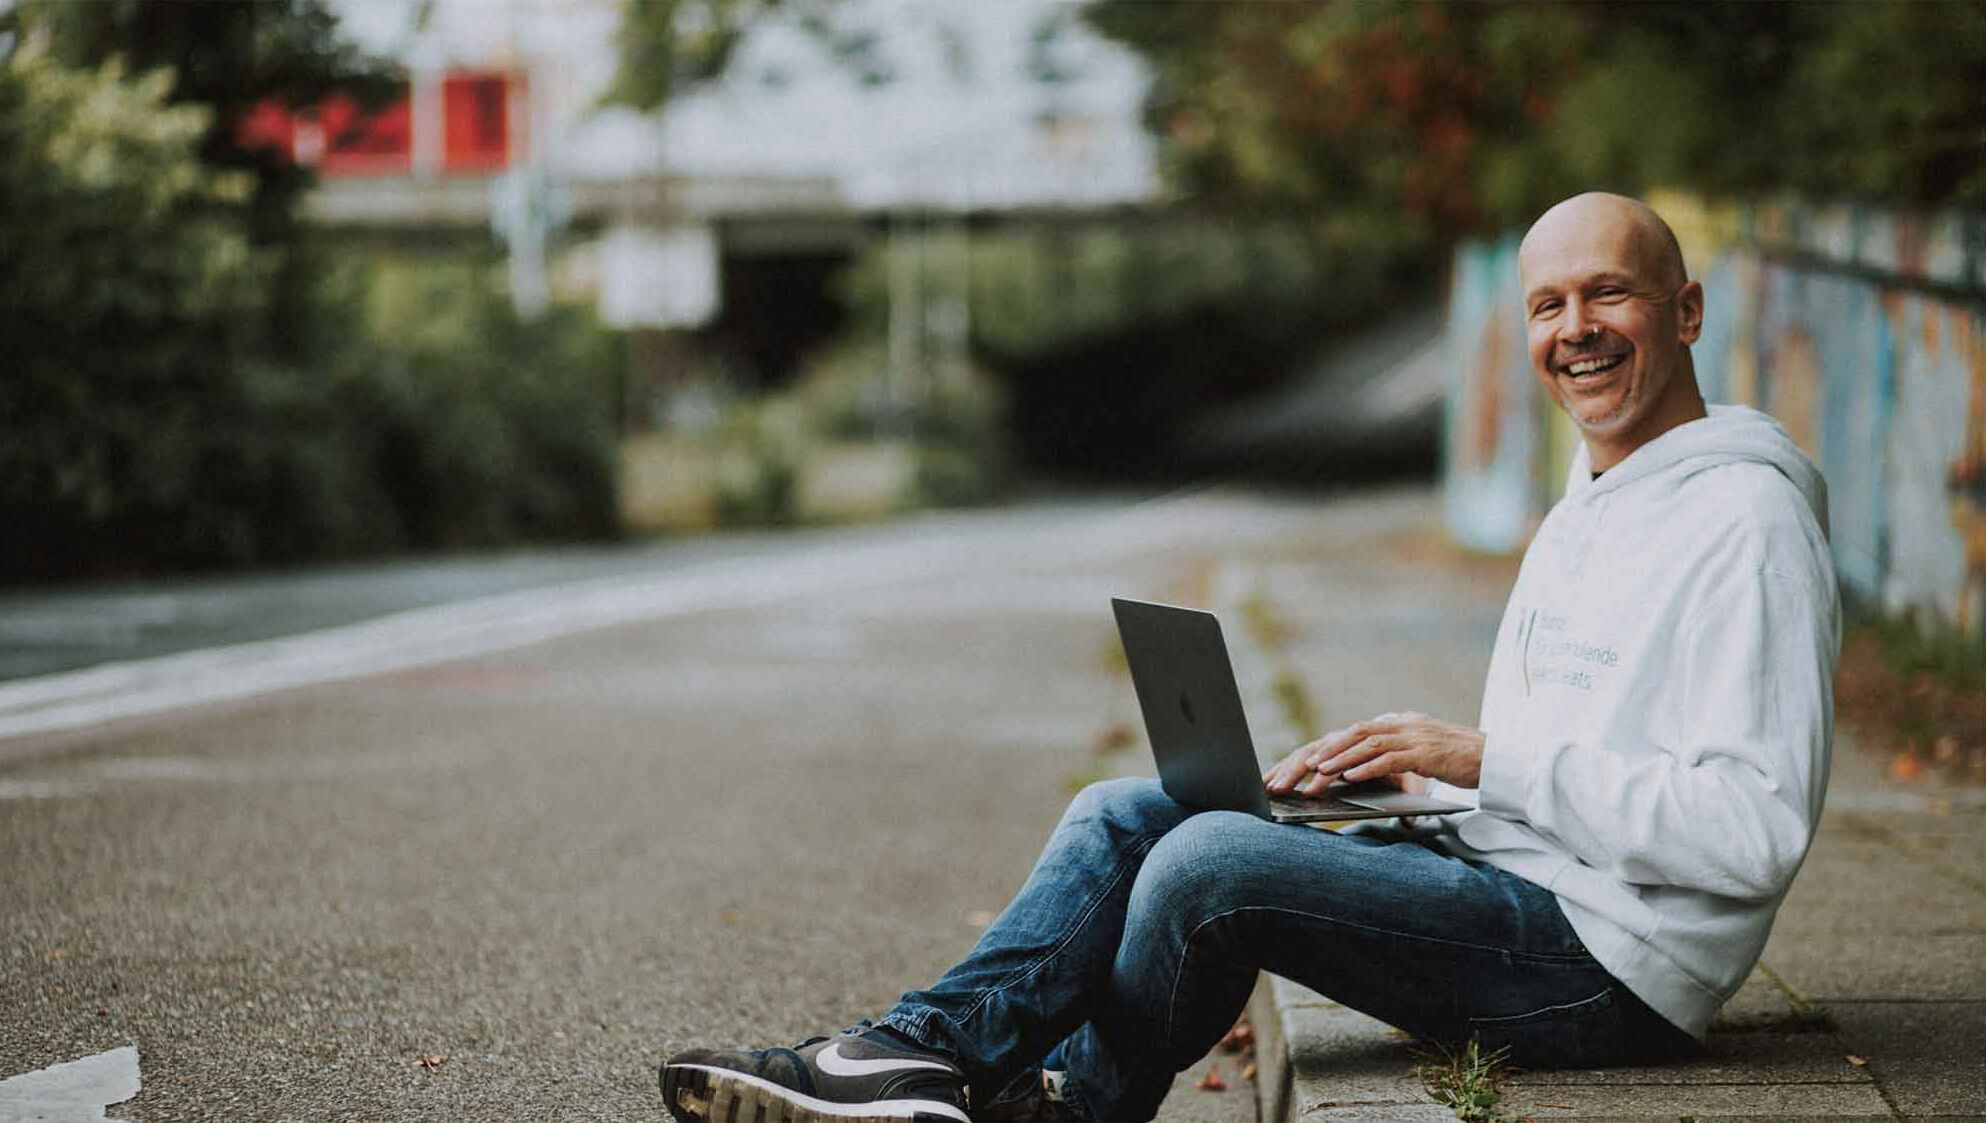 Web designer and graphic designer Paul Jackson sits on the kerb with his laptop and smiles